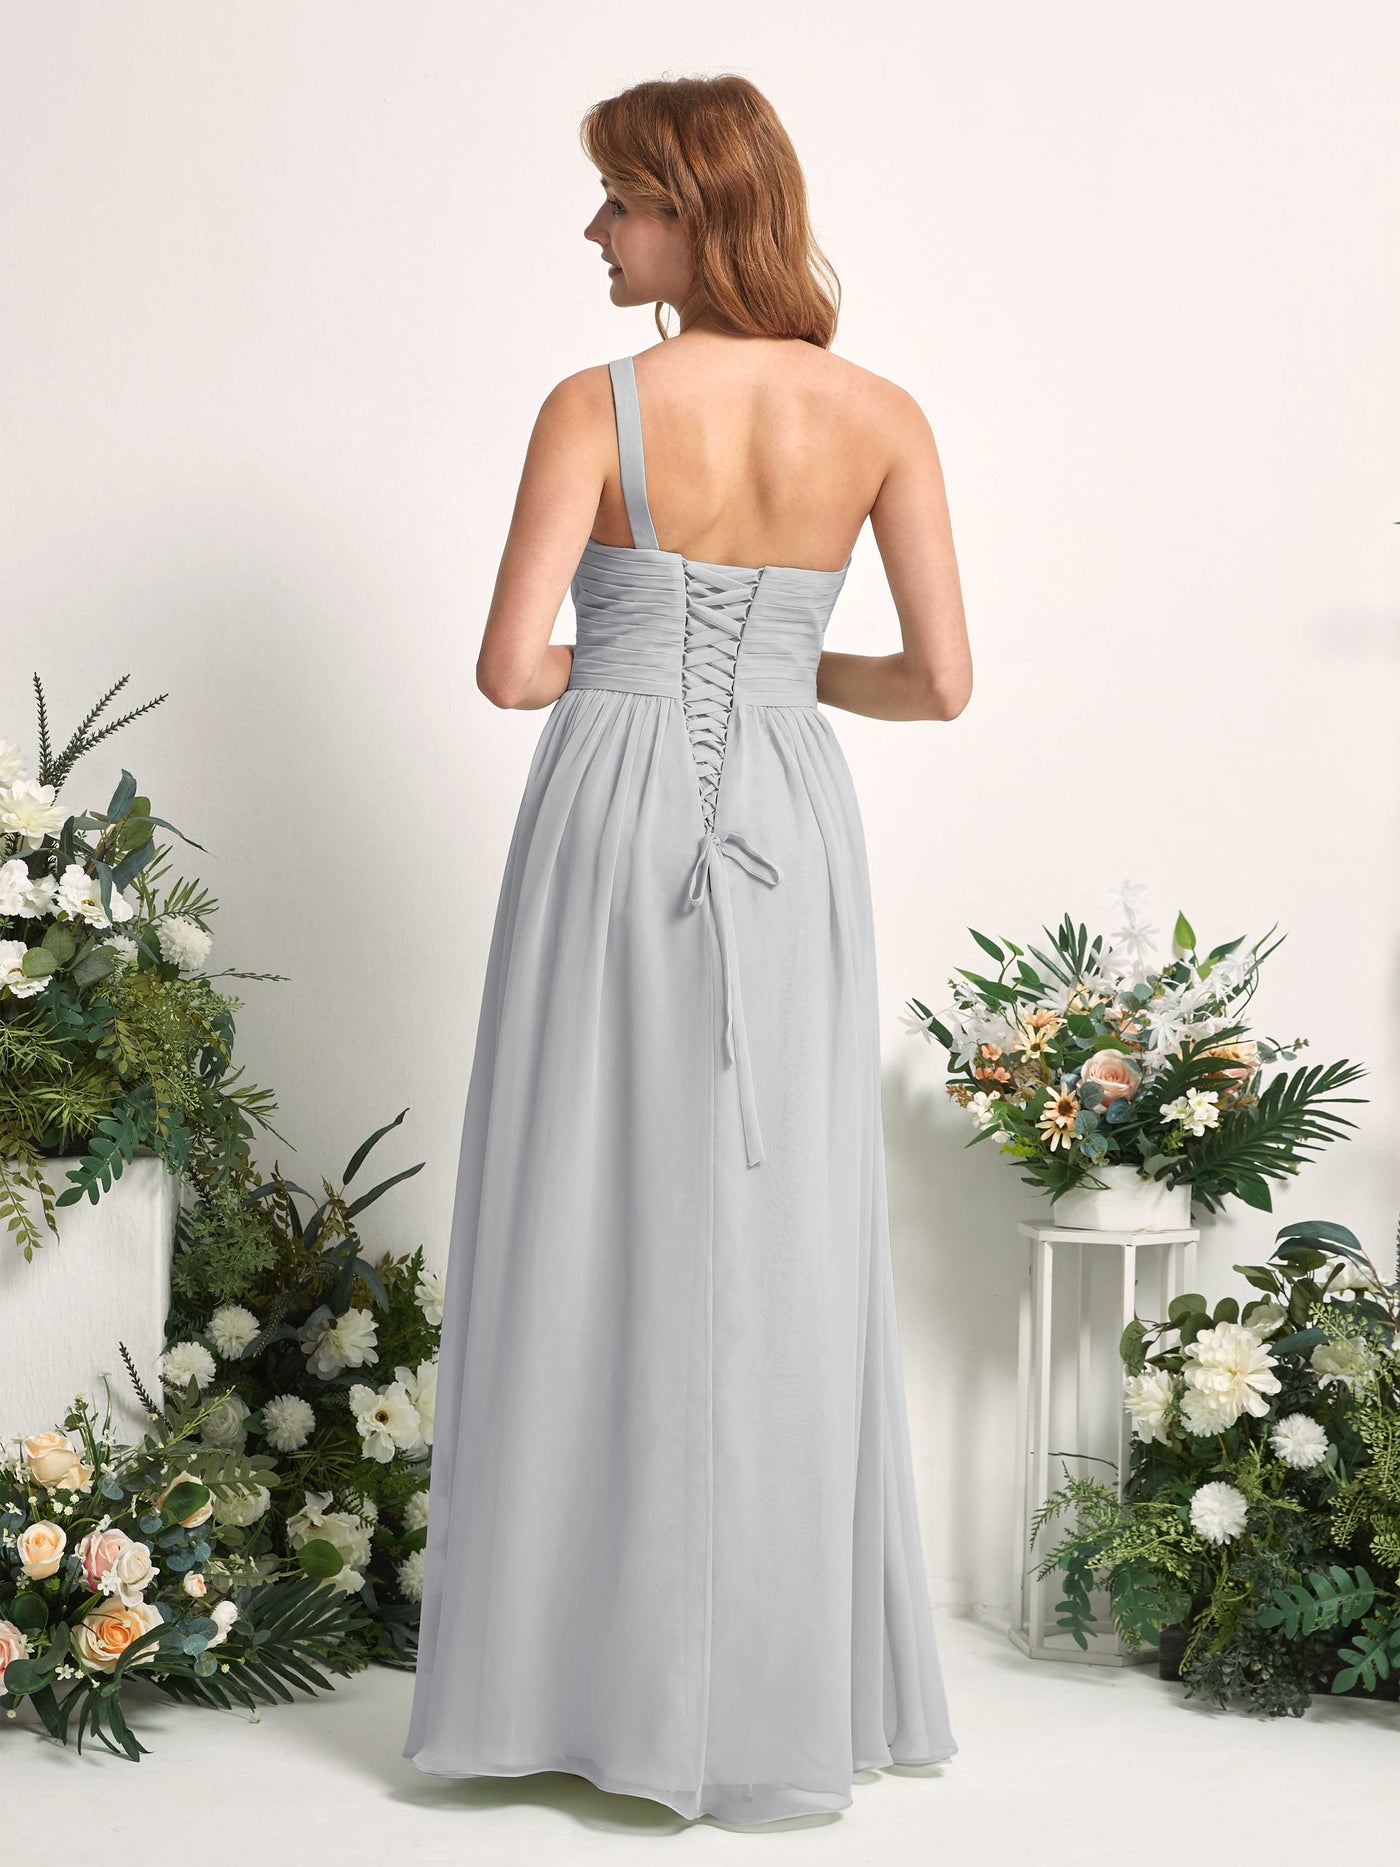 Bridesmaid Dress A-line Chiffon One Shoulder Full Length Sleeveless Wedding Party Dress - Silver (81226727)#color_silver